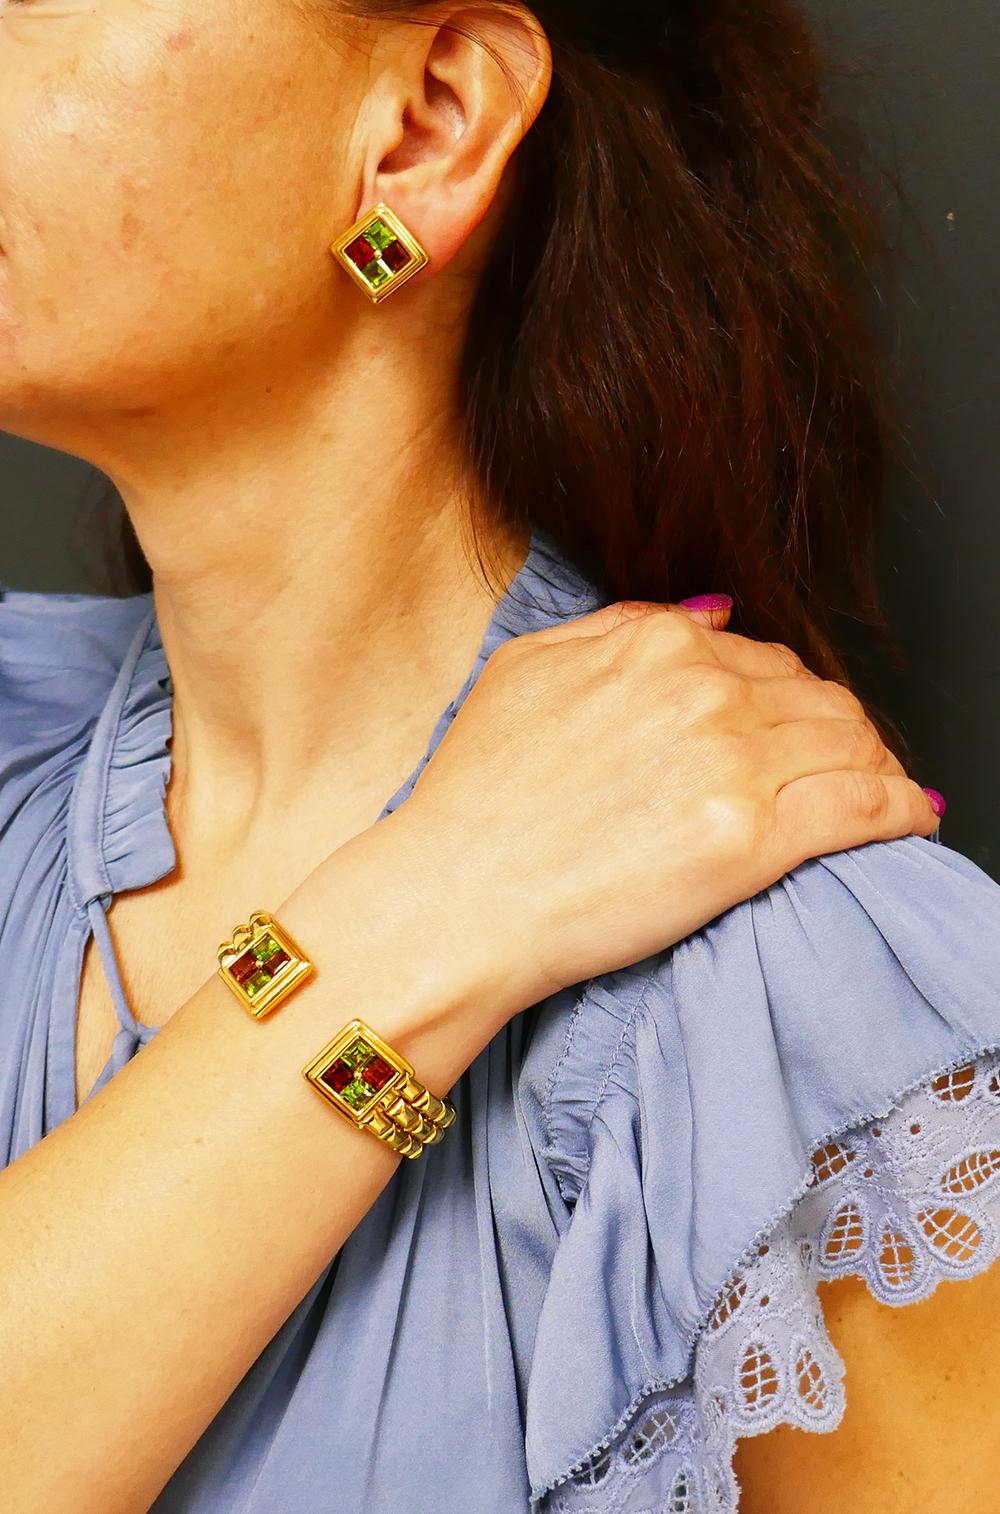   	A gorgeous Garrard 18 karat gold and gemstones vintage set consisting of a cuff bracelet and earrings. 
        The set design is inspired by architectural motifs. The cuff is crafted out of the beveled gold “bricks” and resembles a wall. The